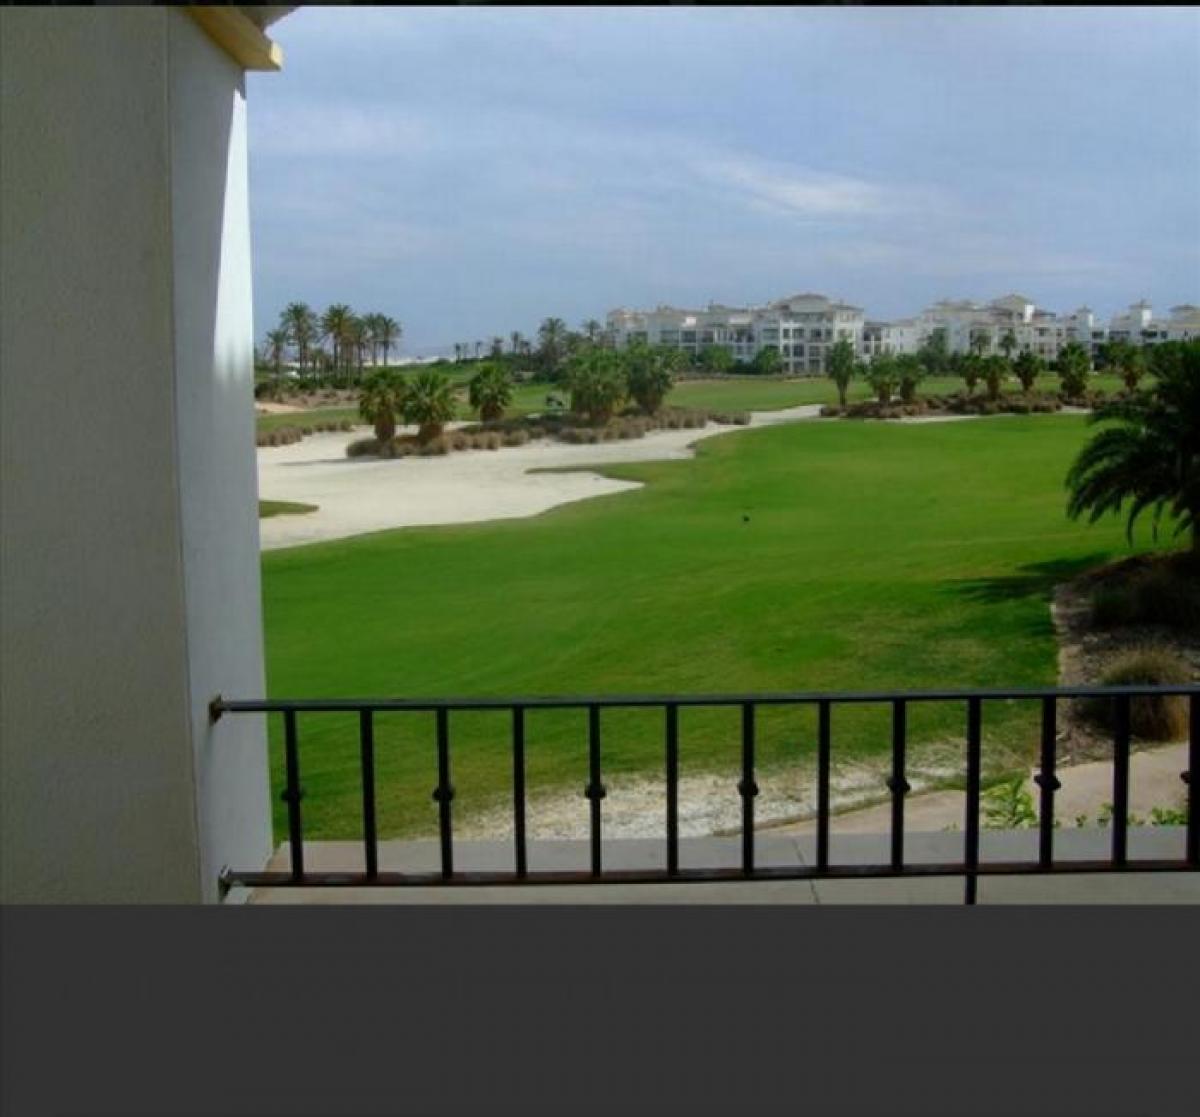 Picture of Apartment For Sale in Roldan, Murcia, Spain